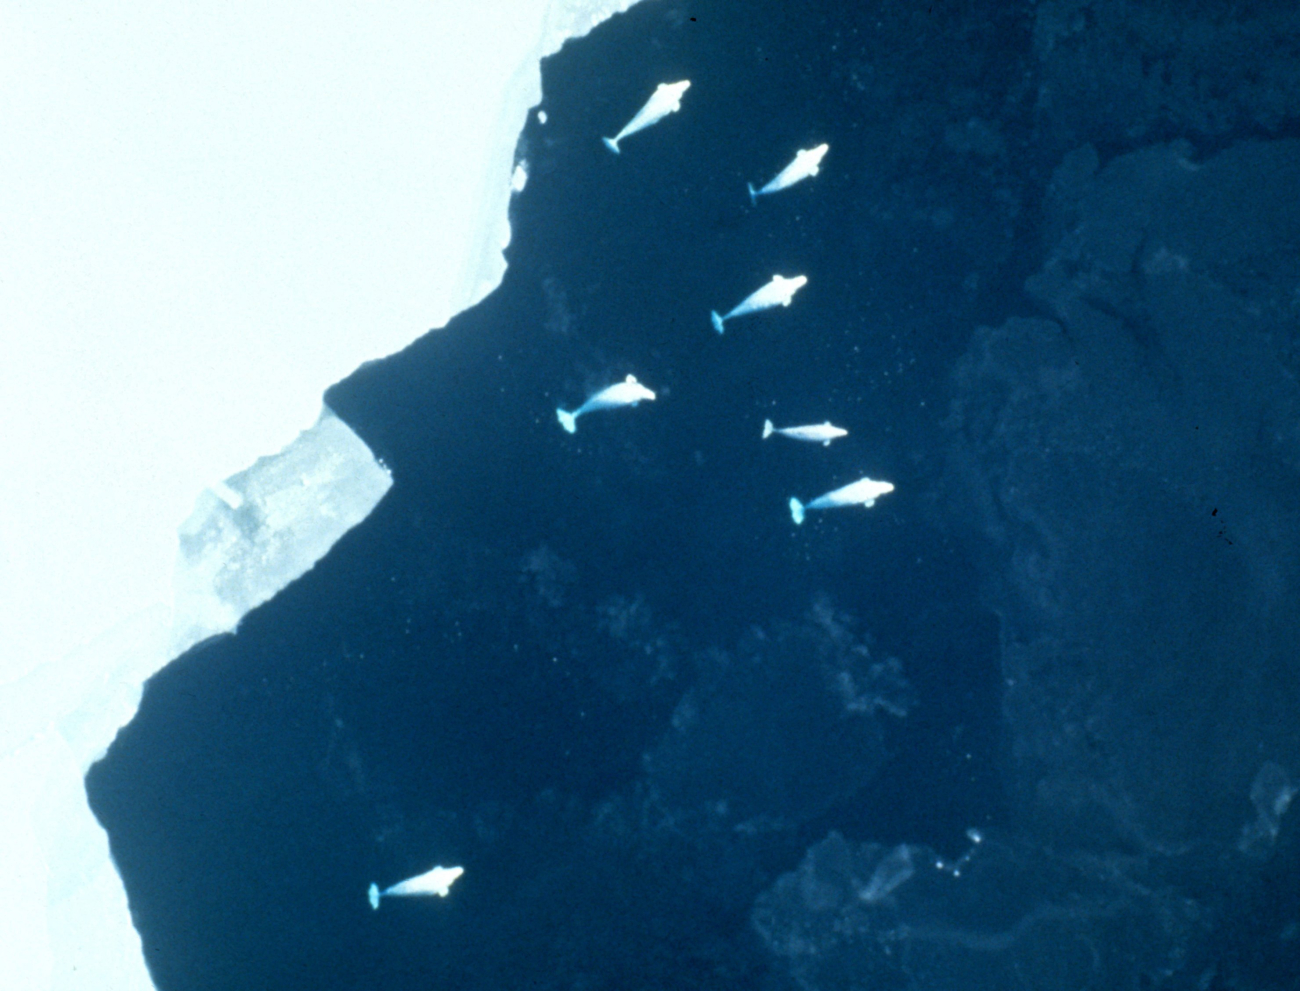 Beluga whales at the edge of a large ice floe